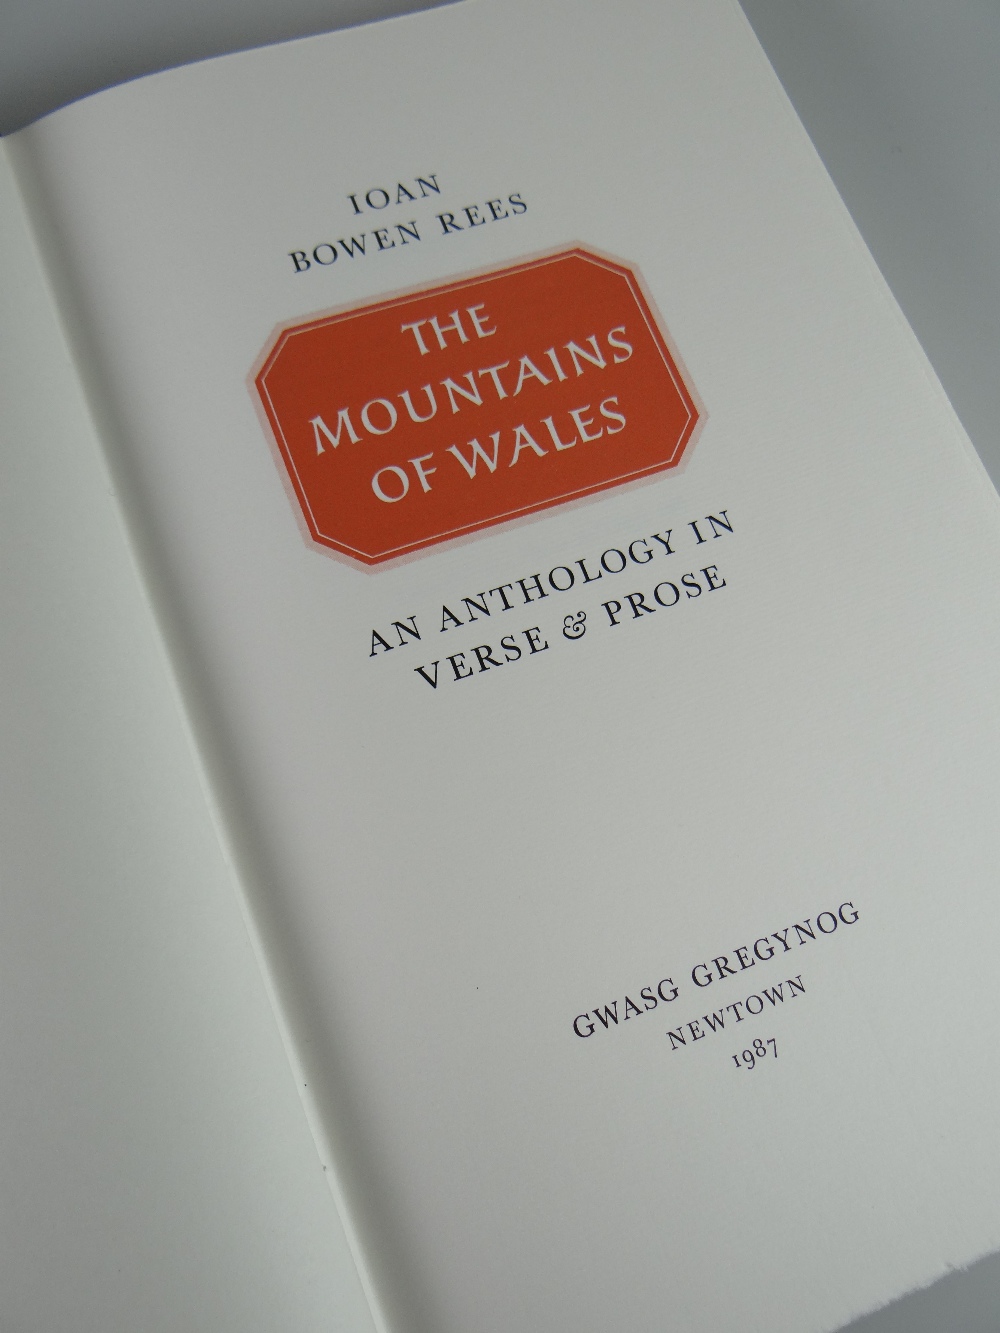 A GWASG GREGYNOG LIMITED EDITION (220/275) VOLUME OF 'THE MOUNTAINS OF WALES' BY IOAN BOWEN REES - Image 2 of 4